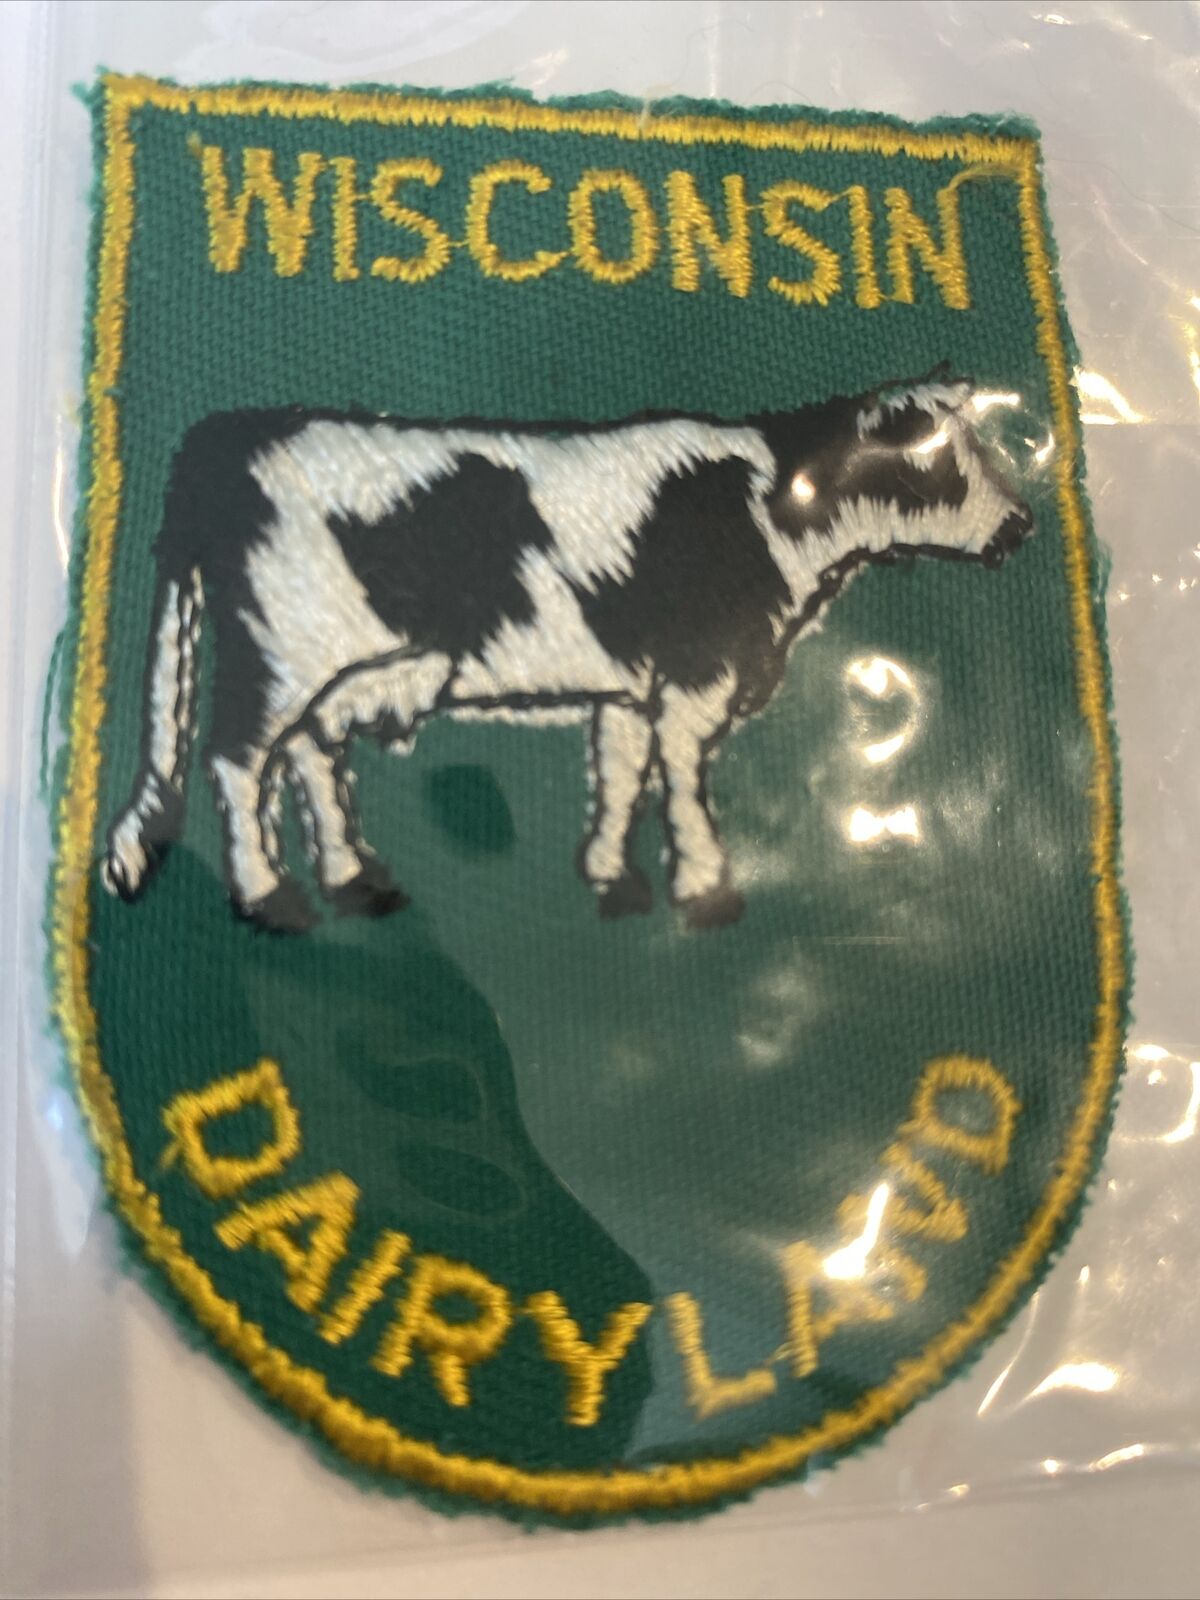 Vintage State Of Wisconsin Dairyland Souvenir Patch.  Never Used